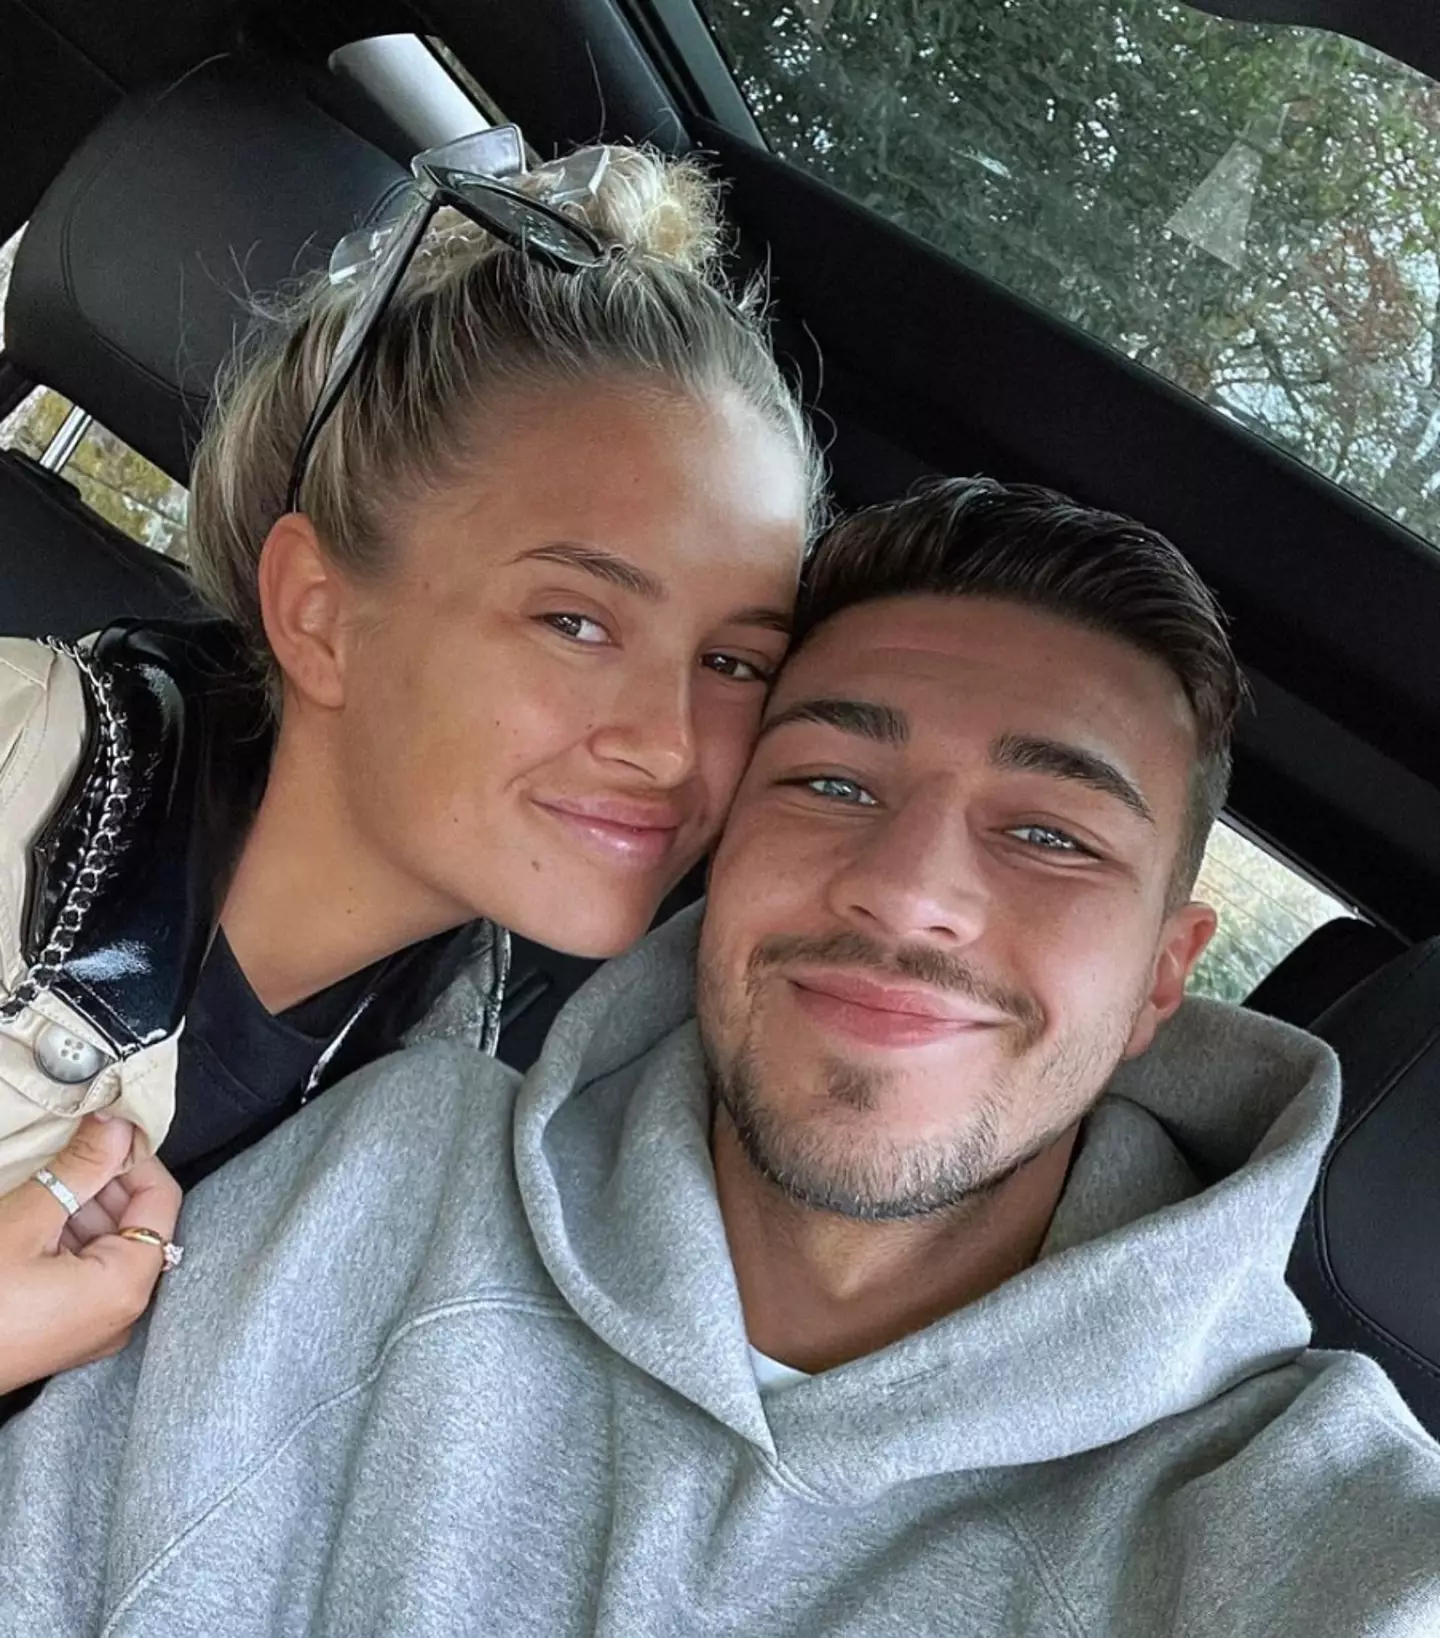 Tommy Fury and Molly-Mae Hague welcomed their first child in January 2023.